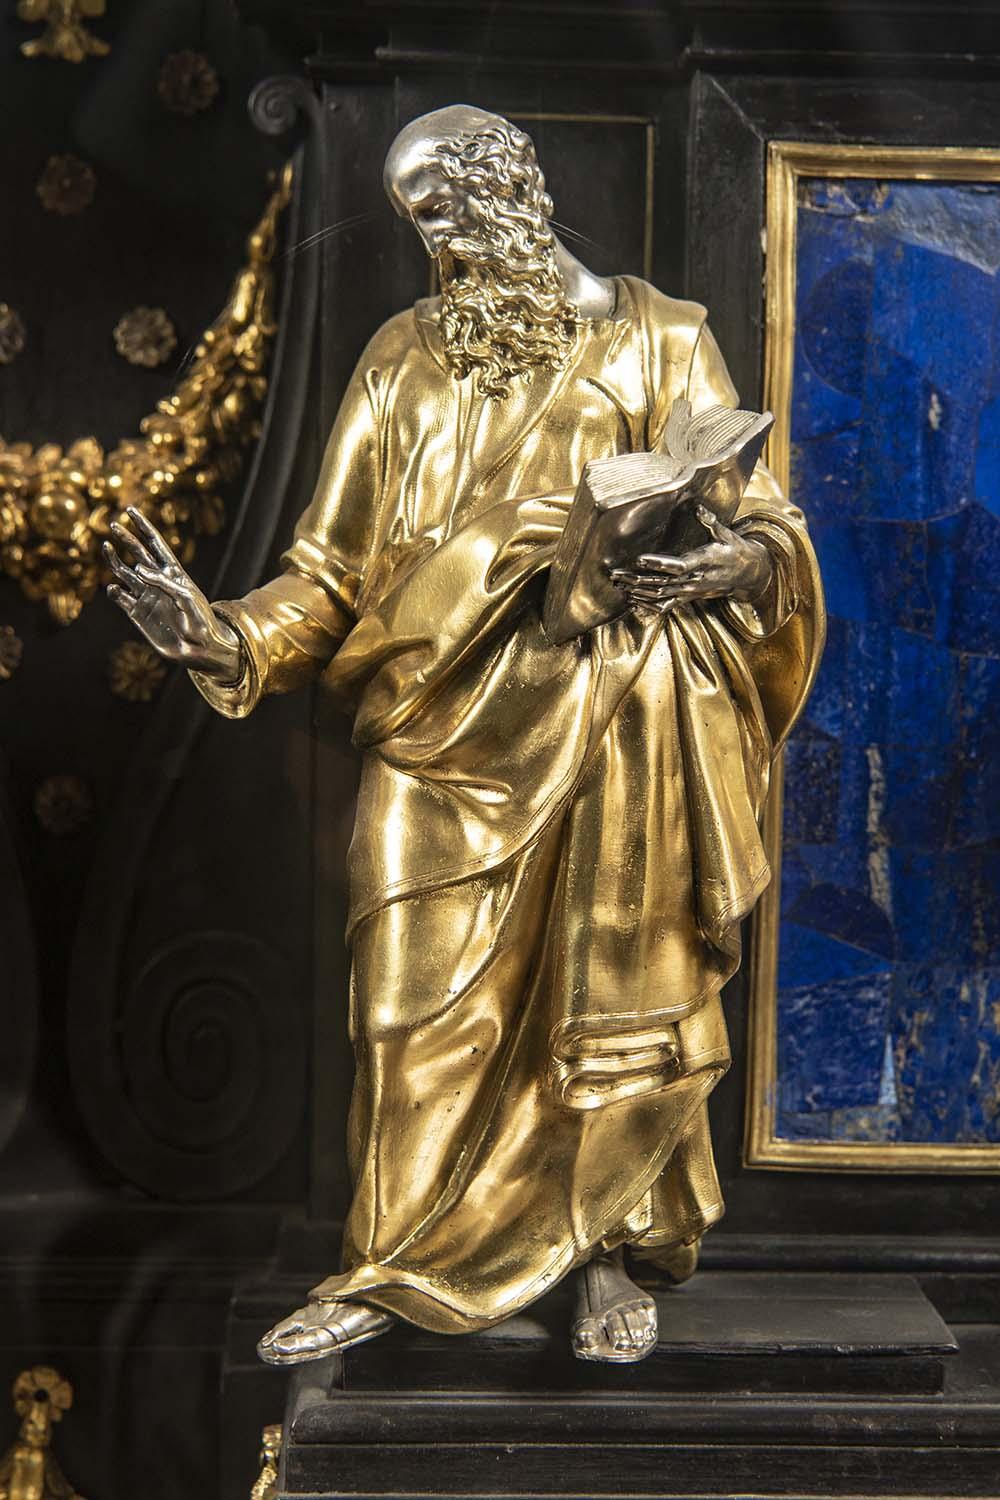 The portable altar by Jacob Cobaert with the Crucifix from the atelier of Gian Lorenzo Bernini